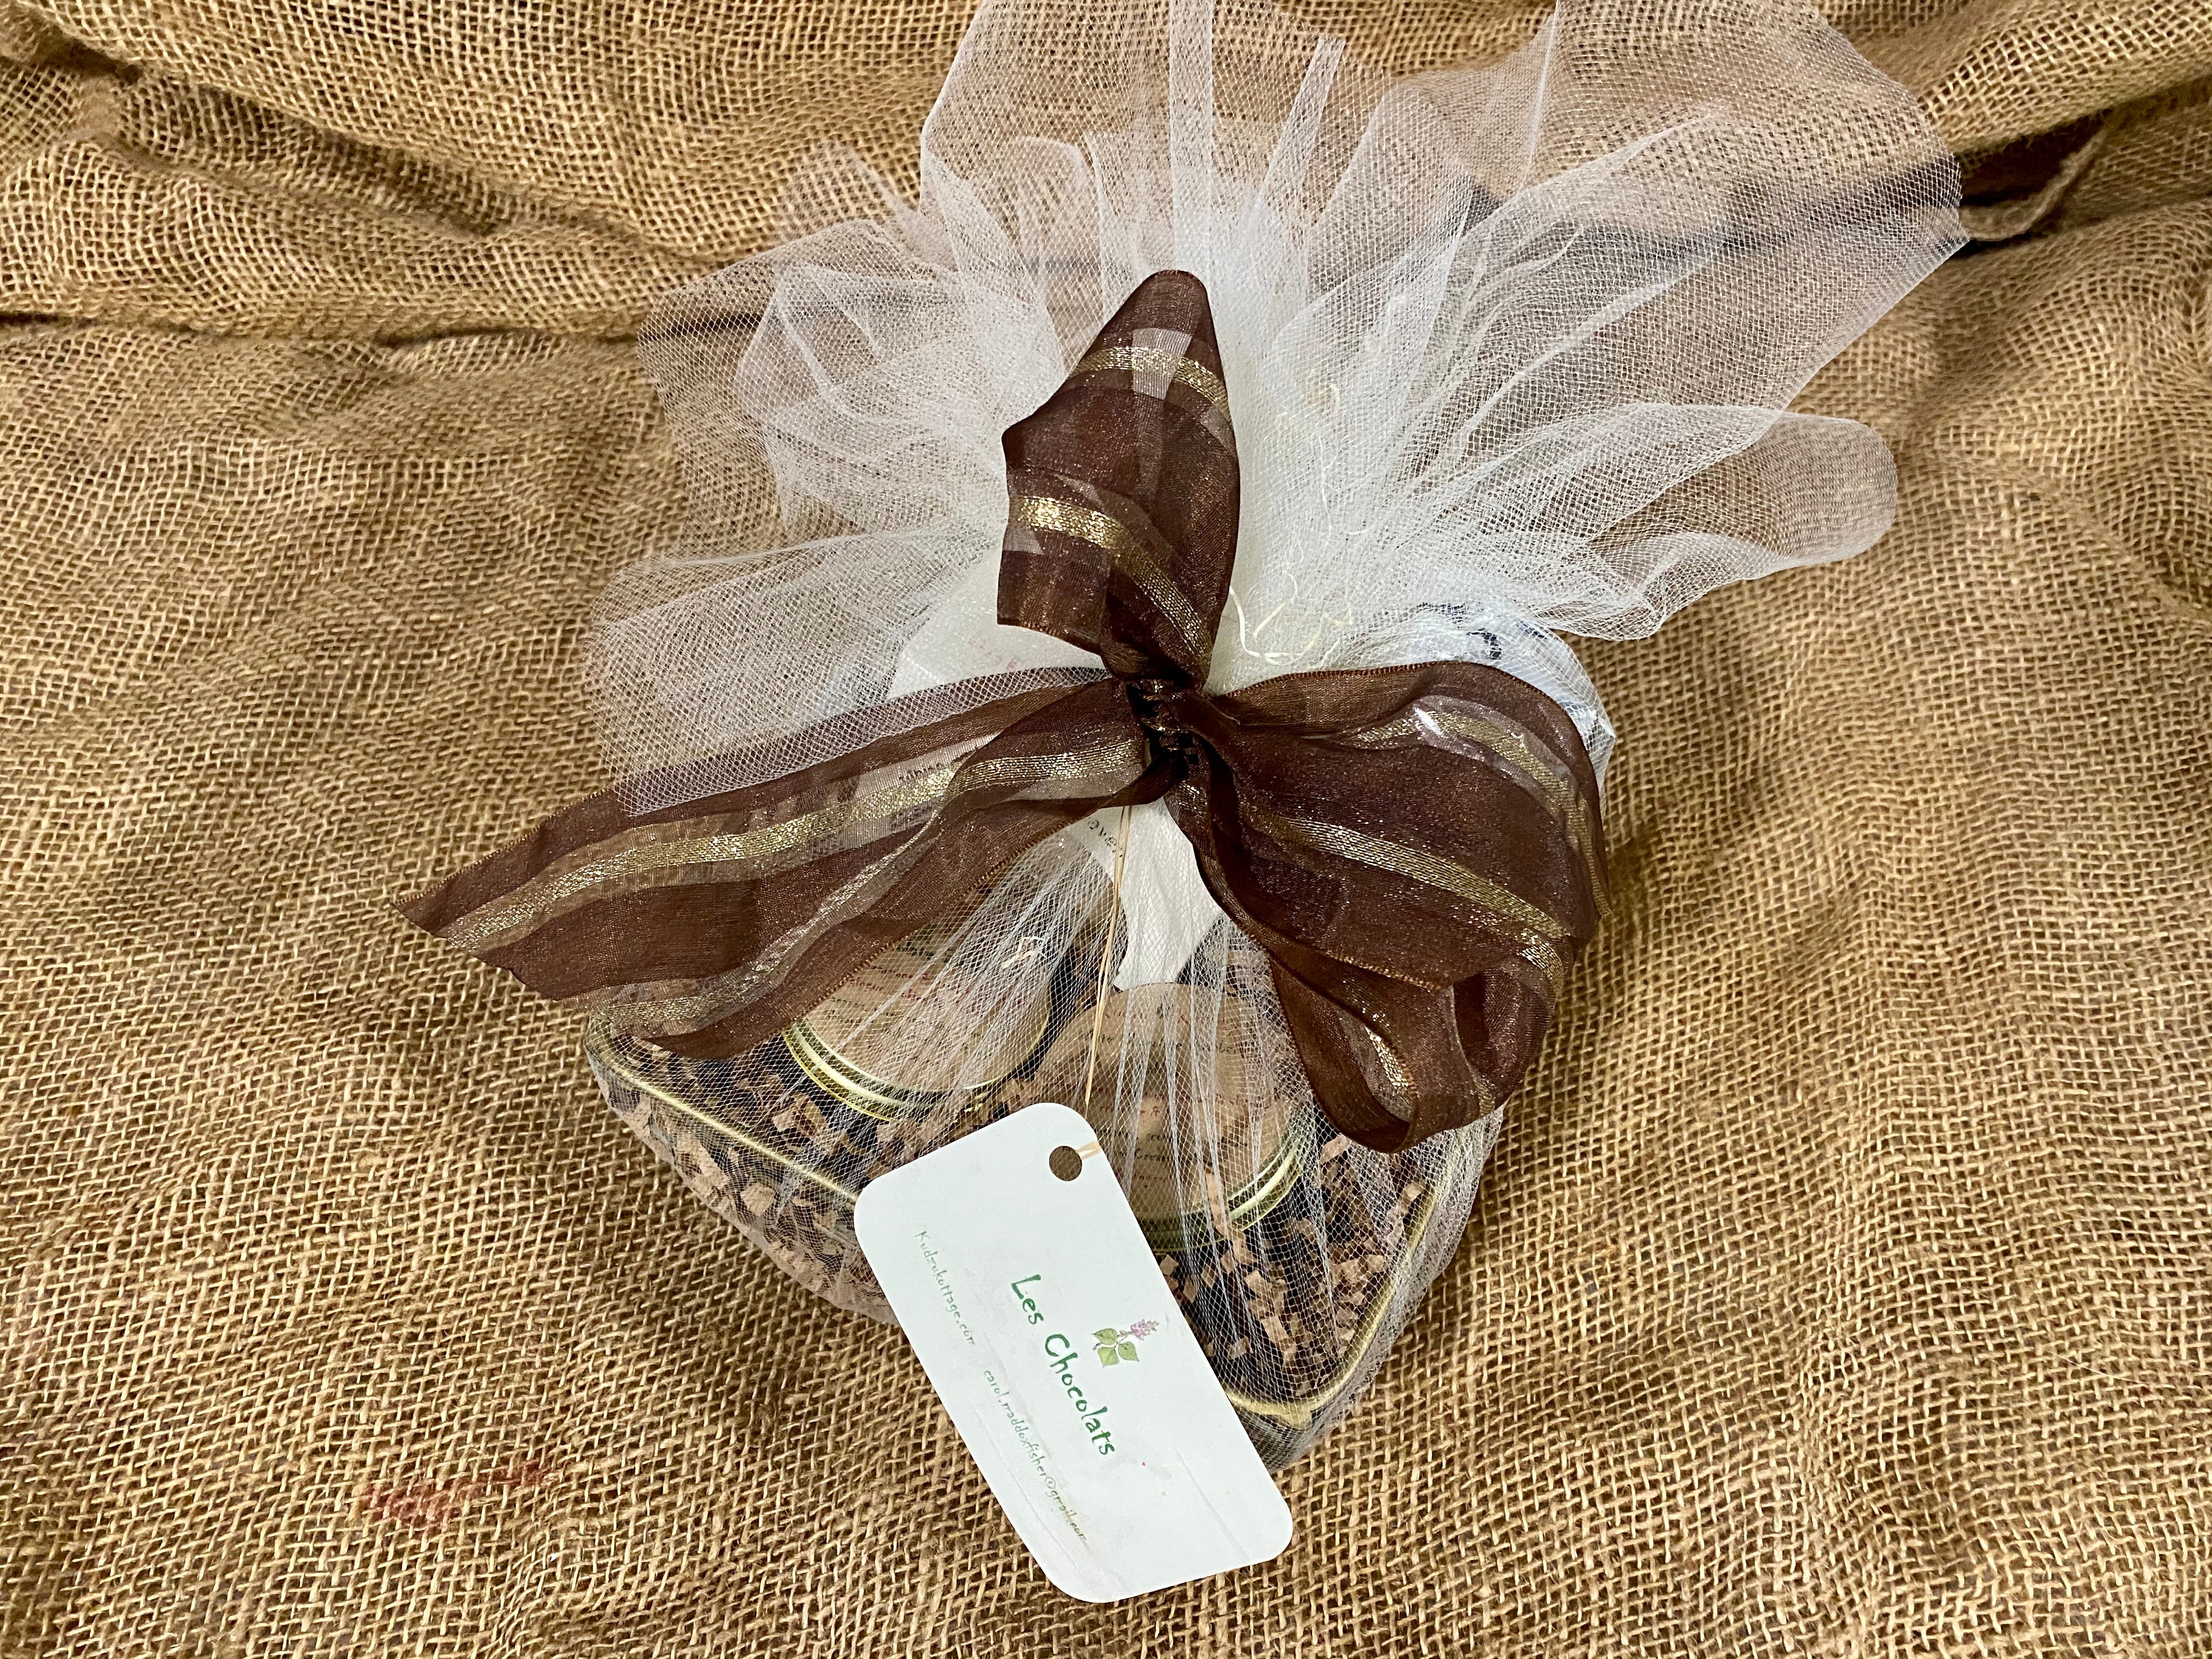 Les Chocolats Wire Gift Basket